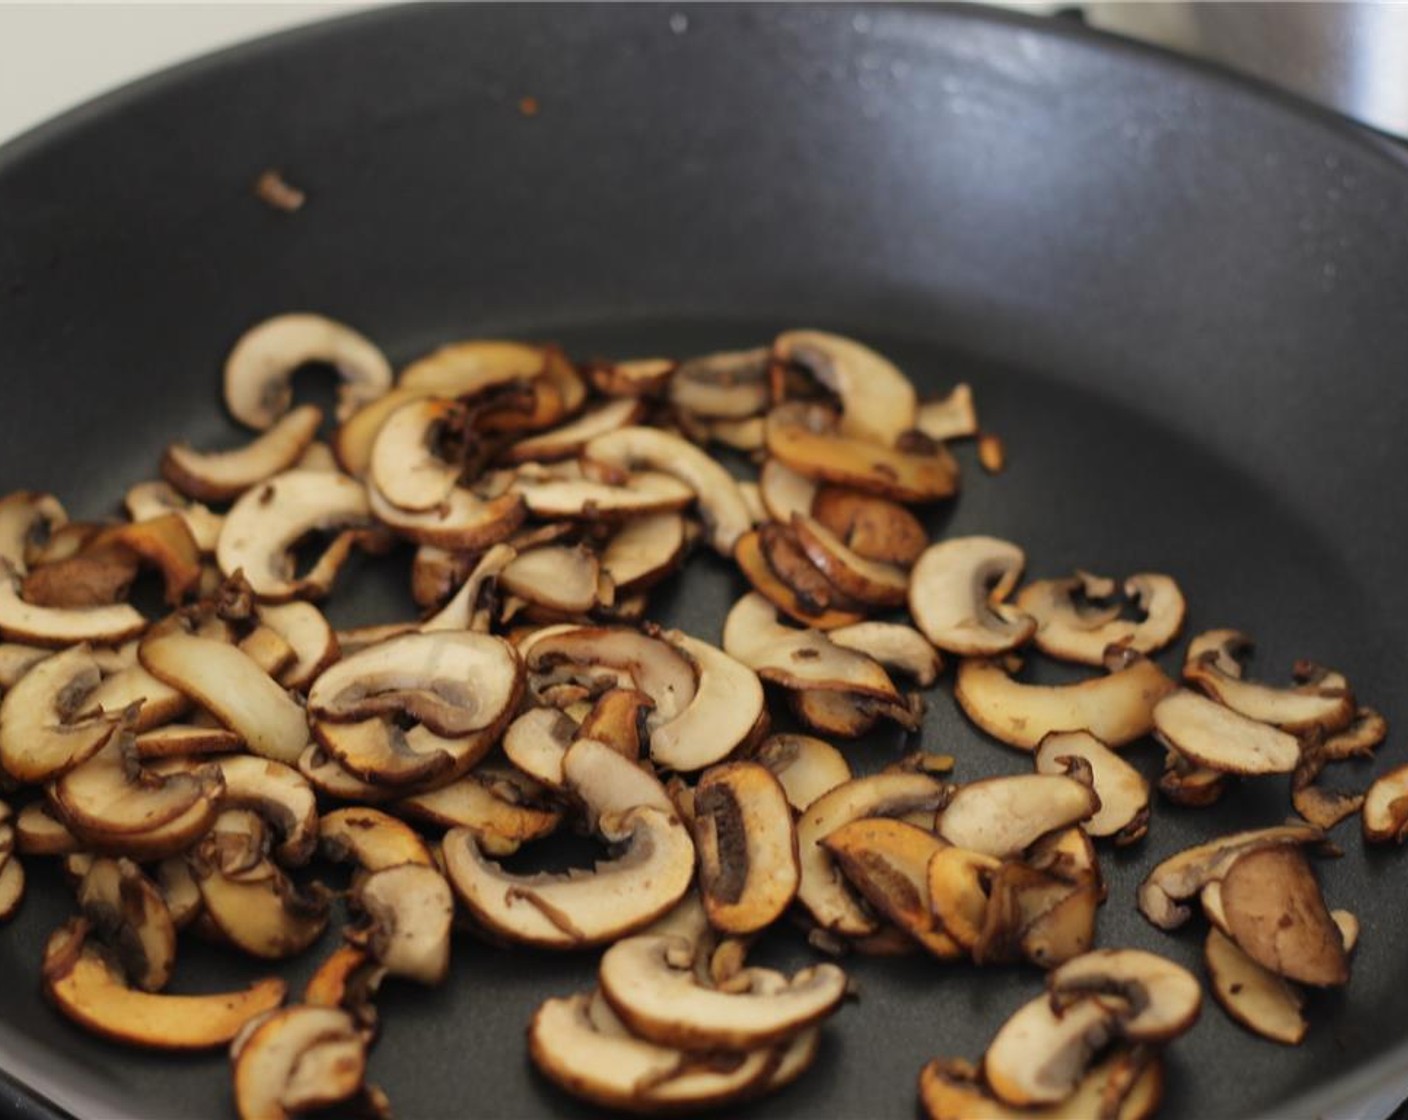 step 4 Spray the same pan with Coconut Oil Cooking Spray (as needed) then sauté mushrooms at high heat until browned, 5-6 minutes. Set aside into the bowl of beef.